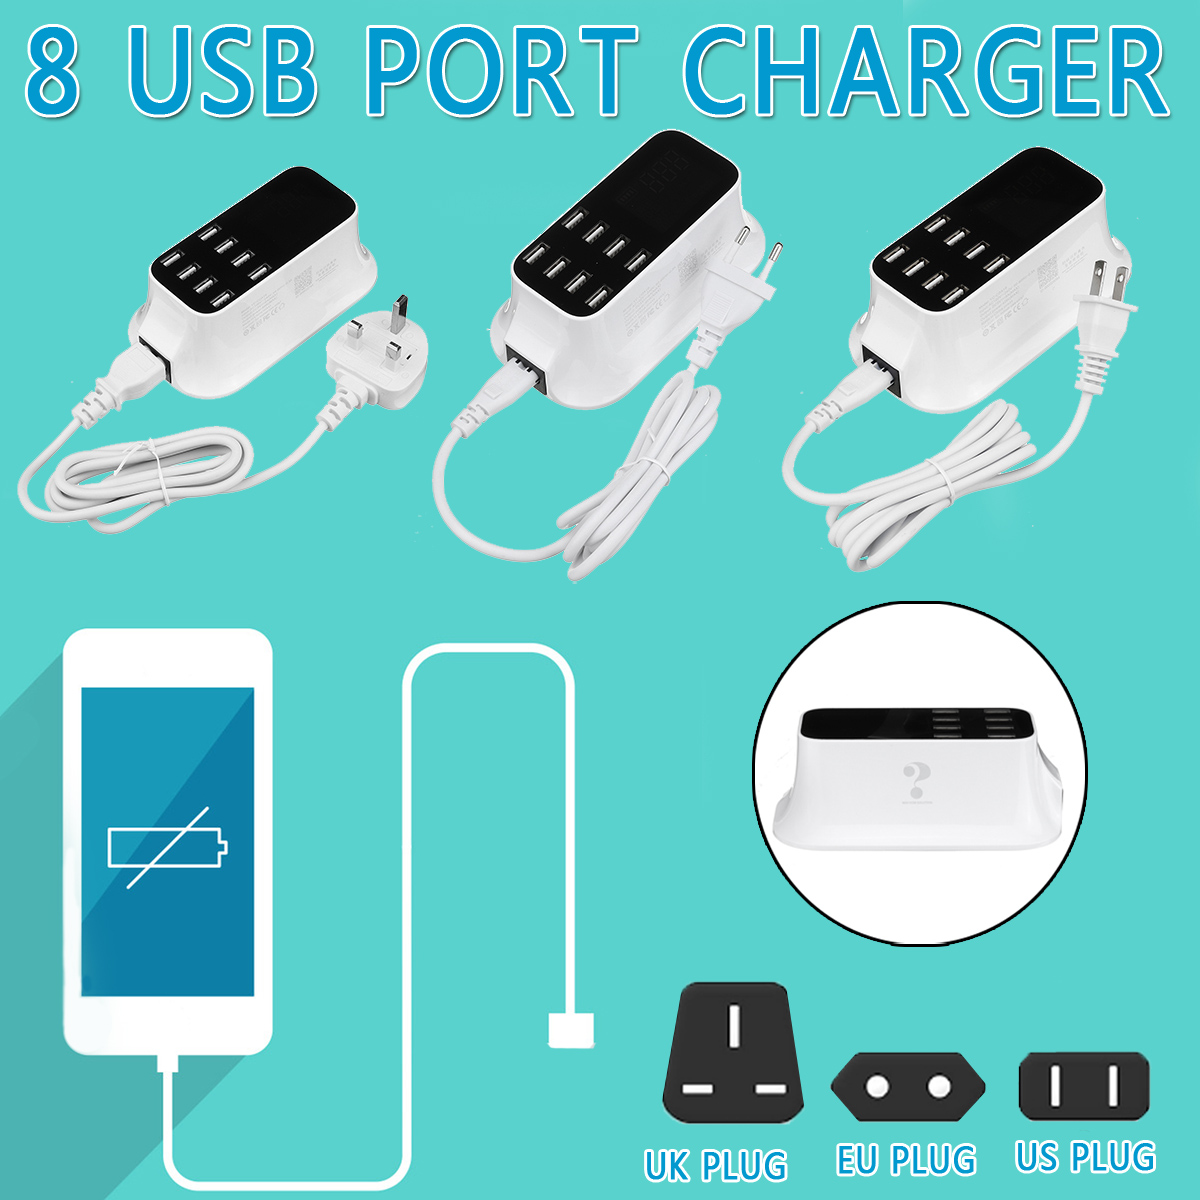 USB-Charger-8-Ports-Charging-Station-Multi-Port-USB-Charging-Hub-for-Multiple-Devices-1550725-1